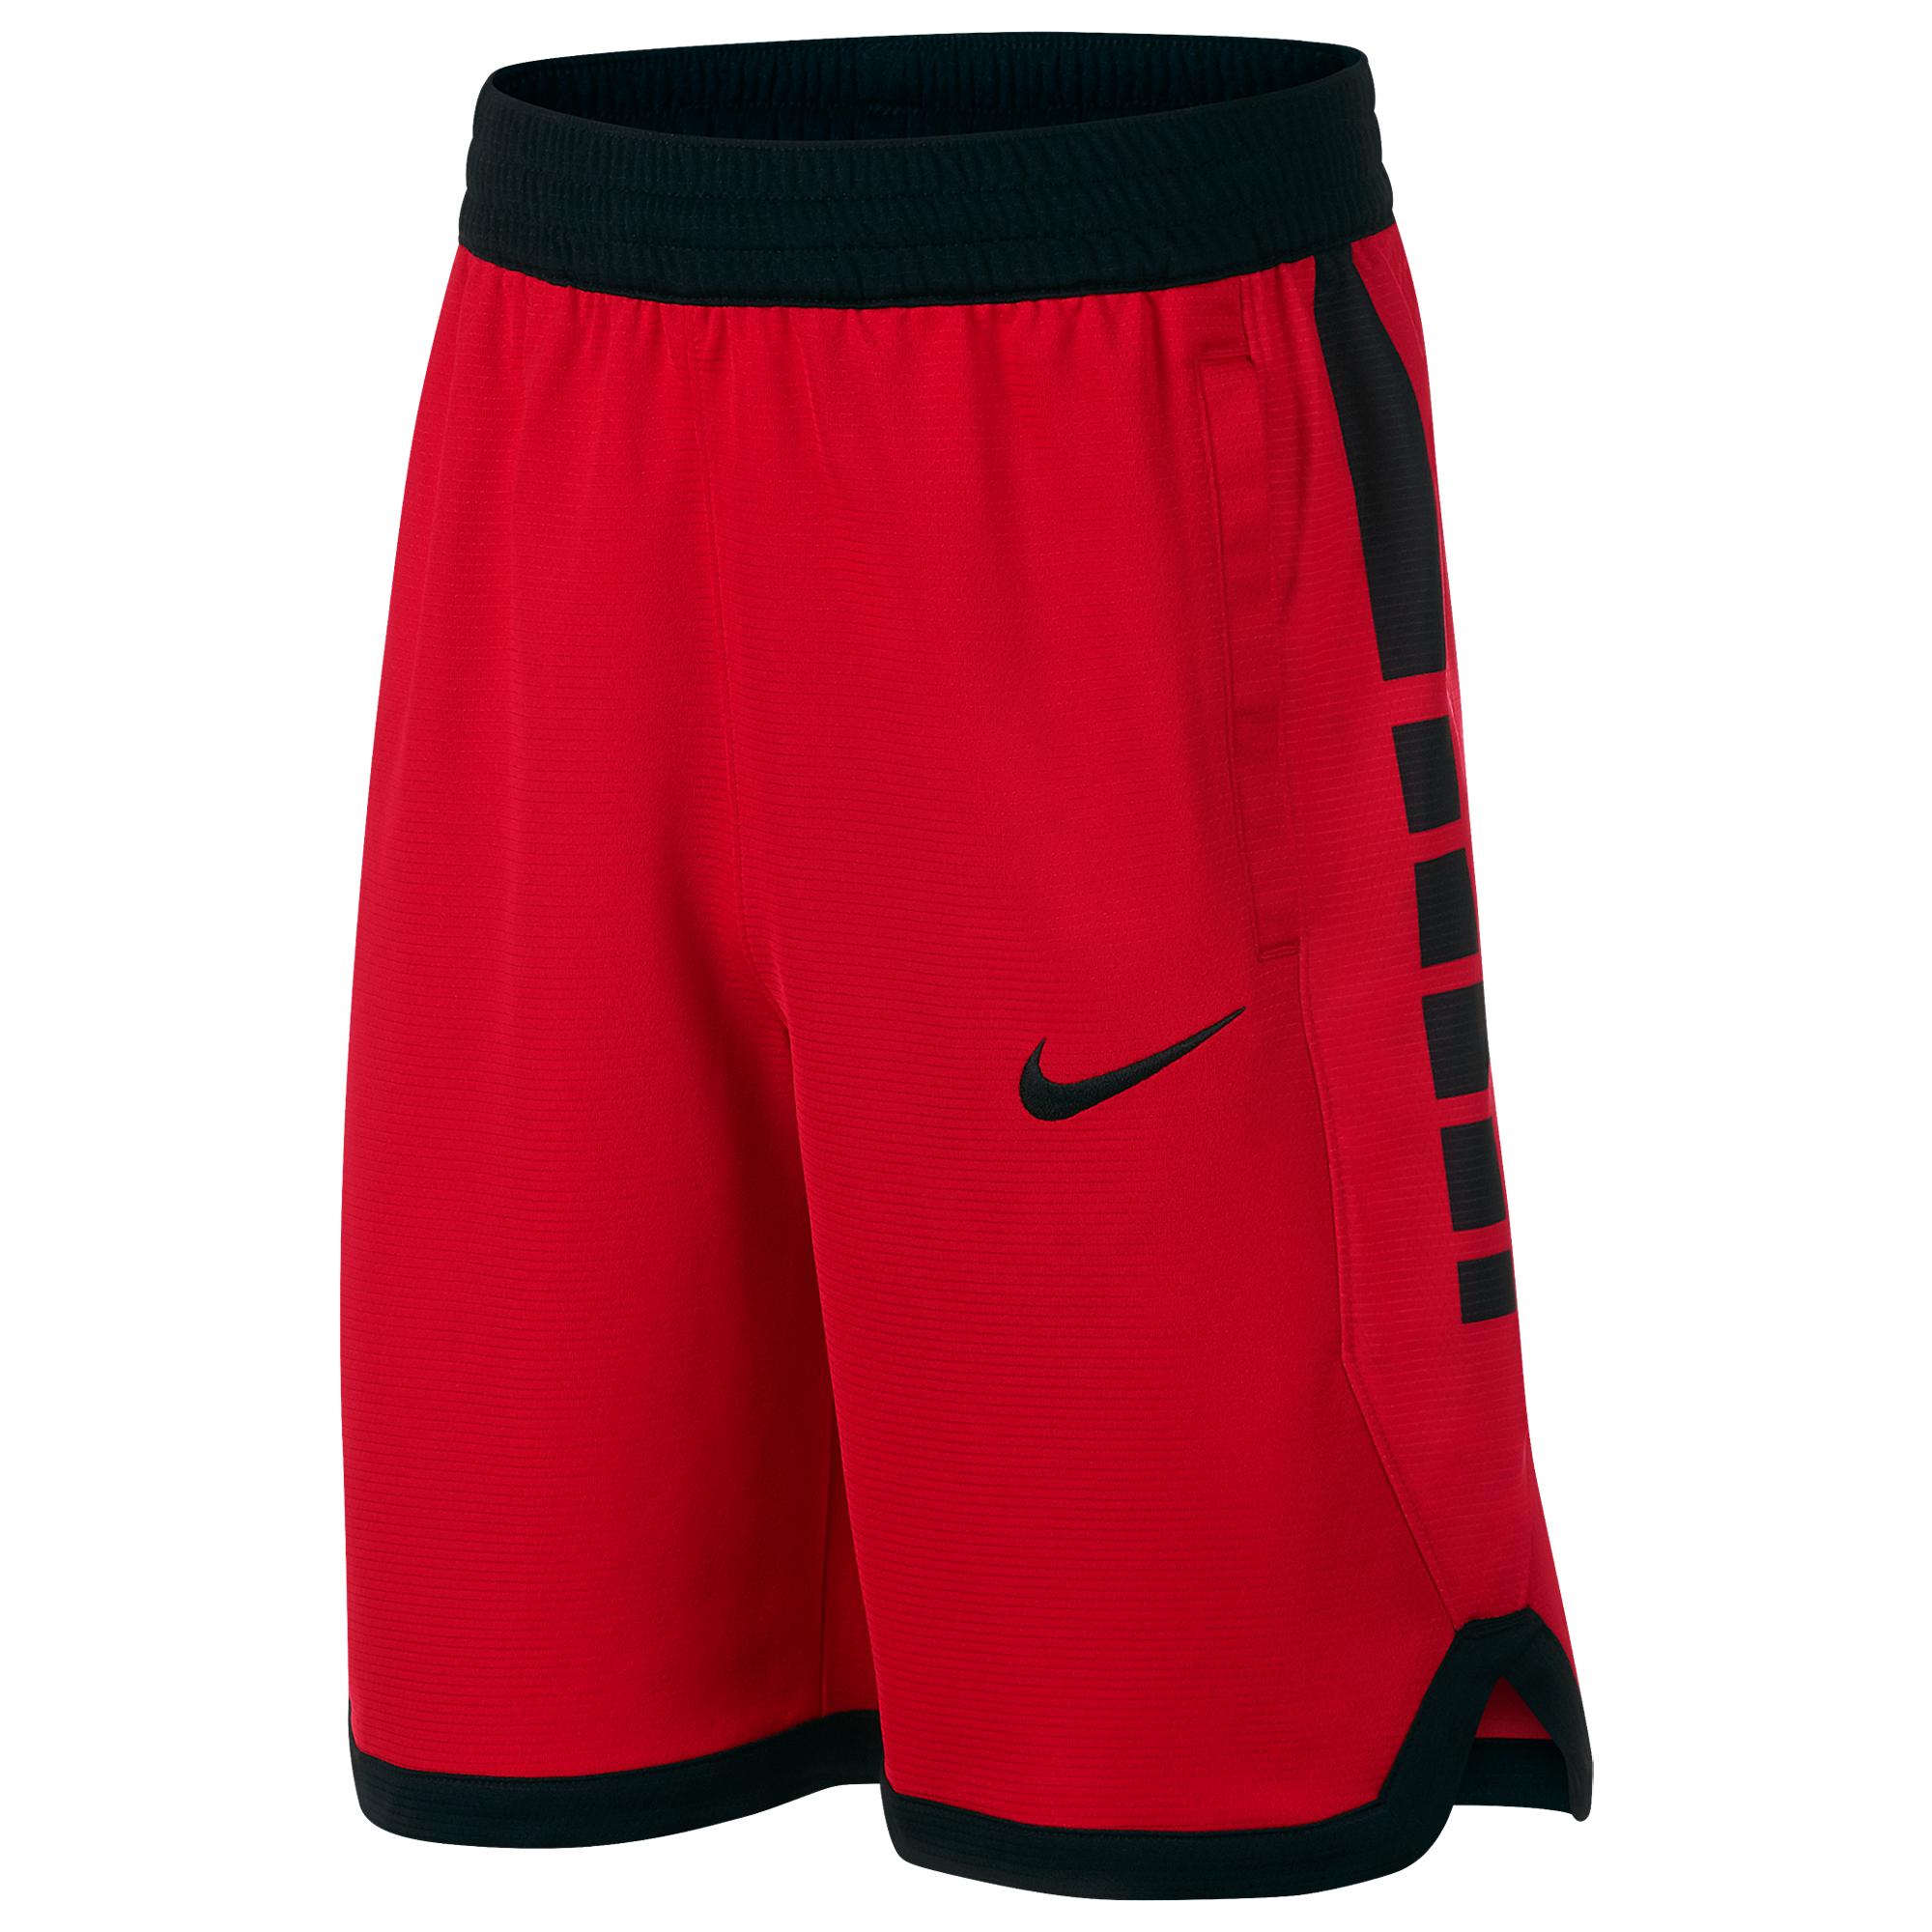 Nike Synthetic Elite Stripe Shorts in University Red/Black (Red) for ...